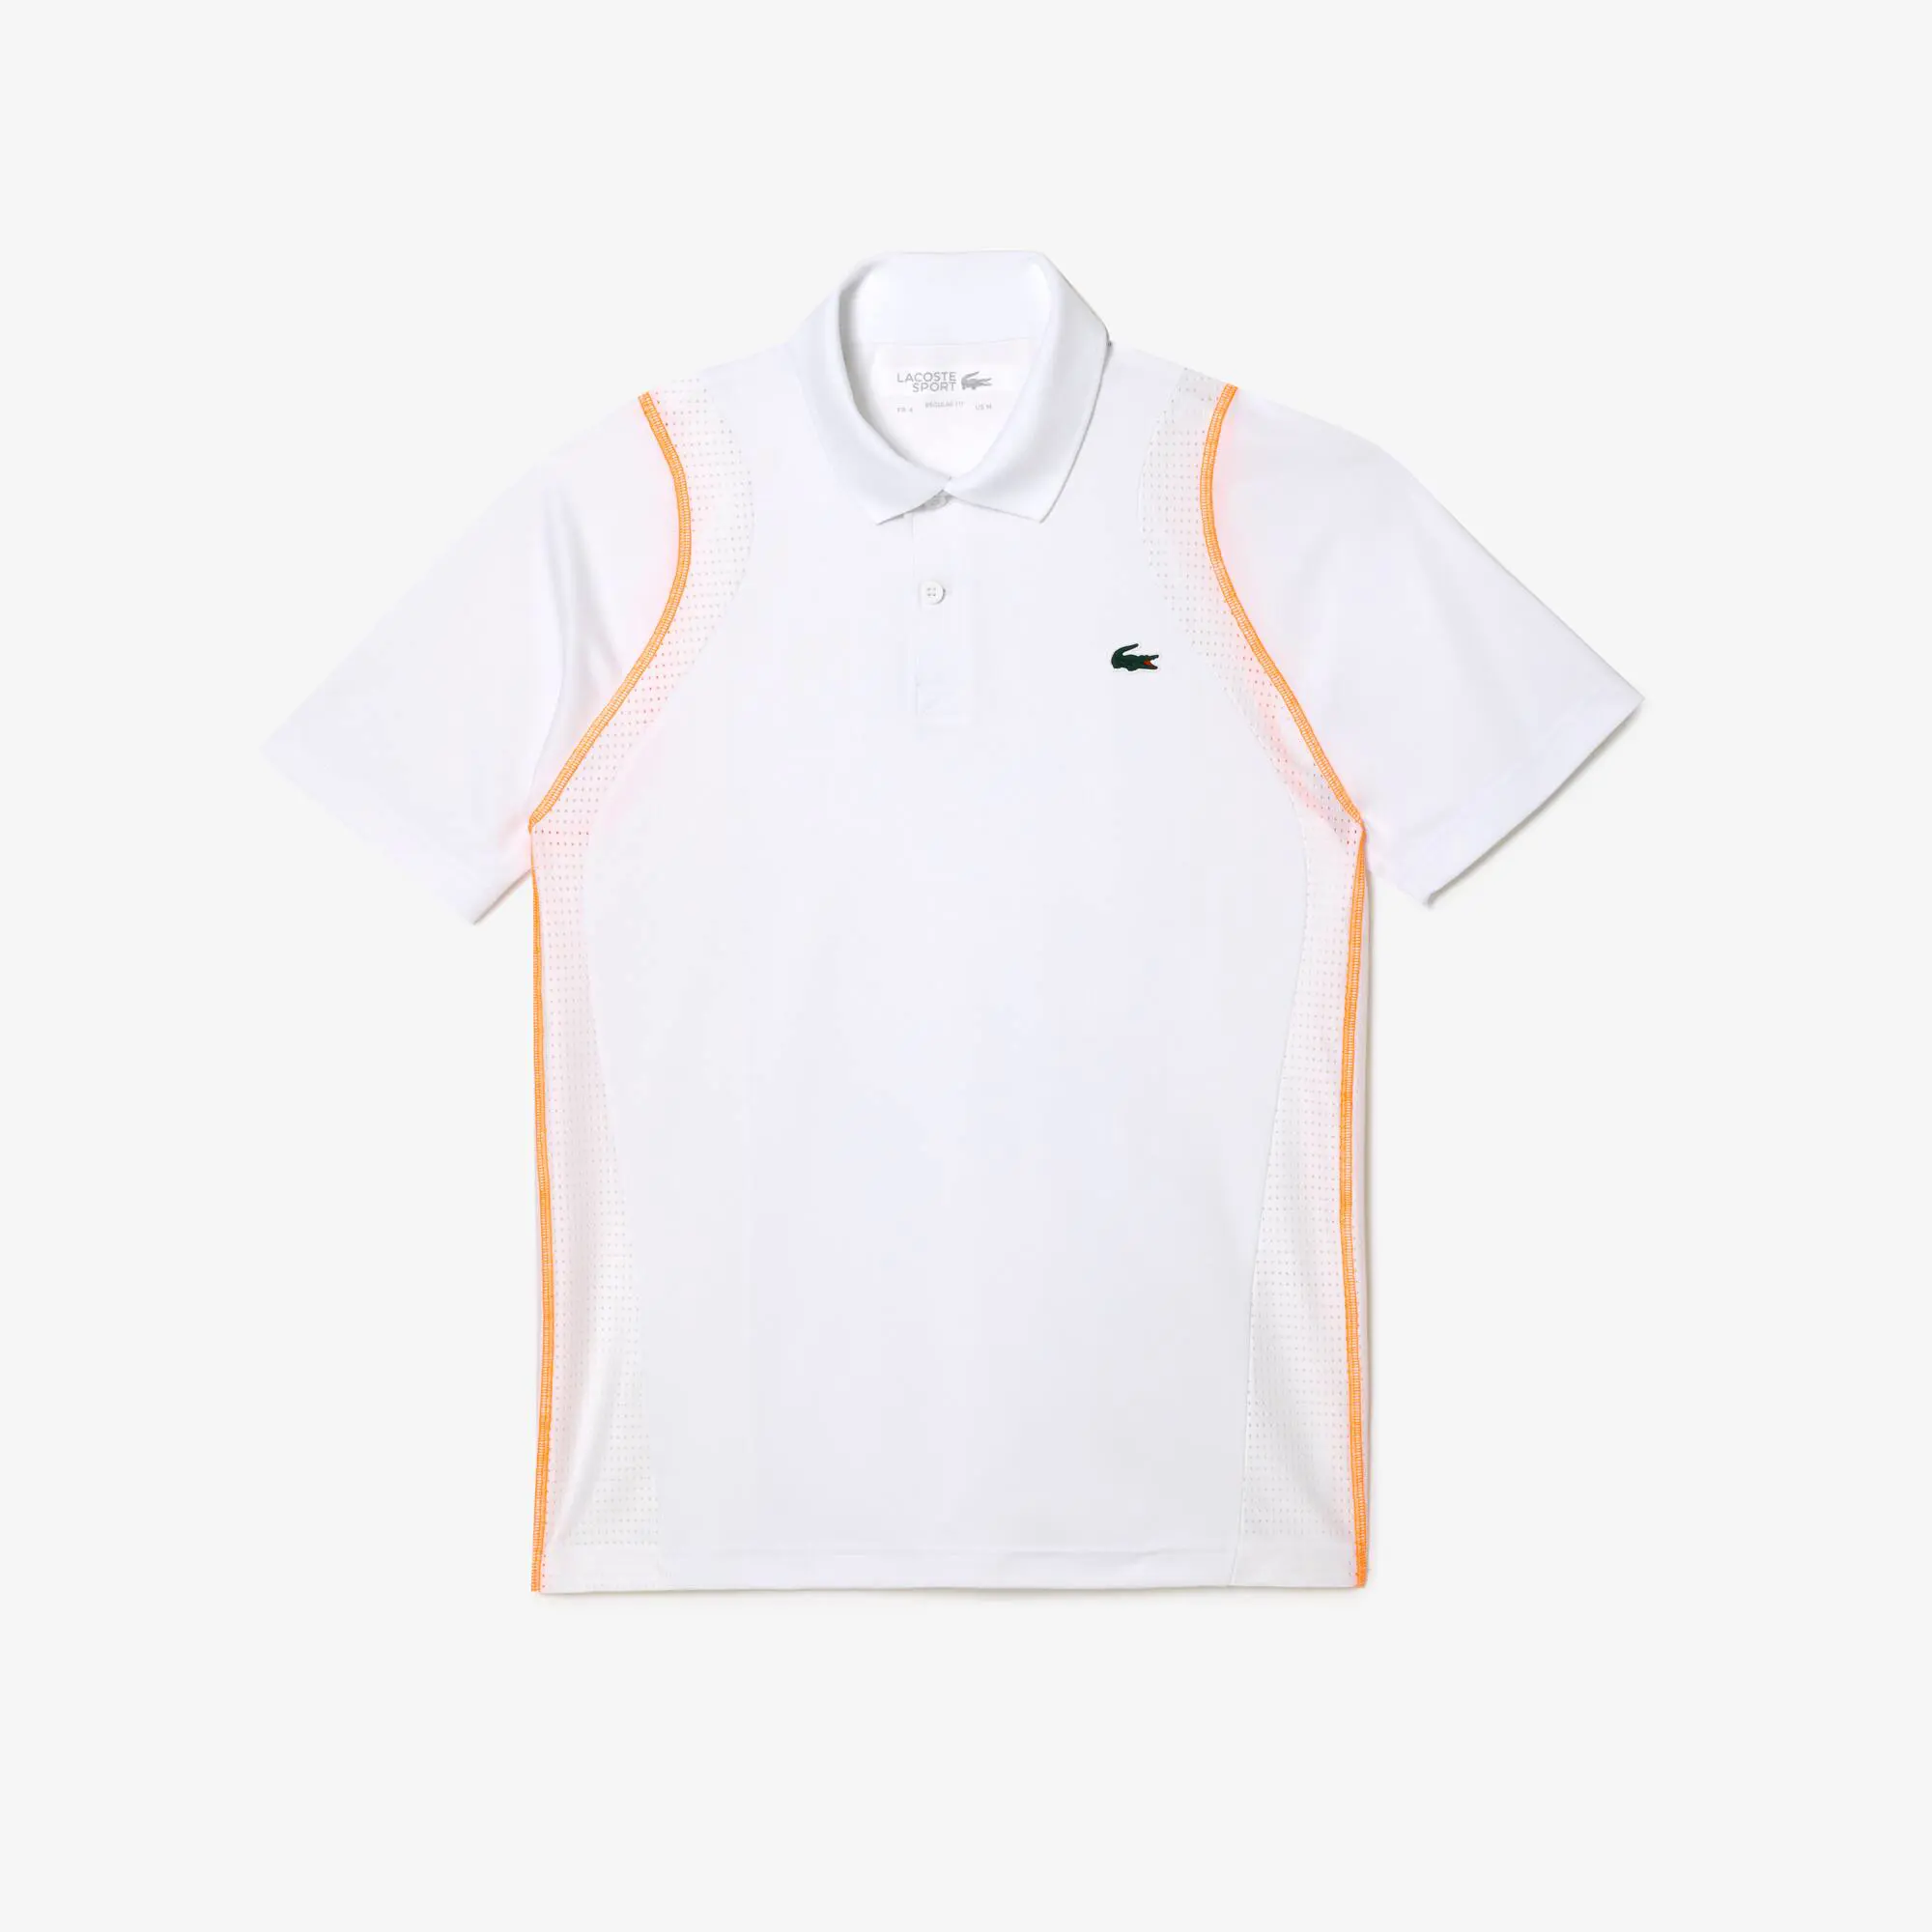 Lacoste Men’s Lacoste Tennis Recycled Polyester Polo Shirt. 2